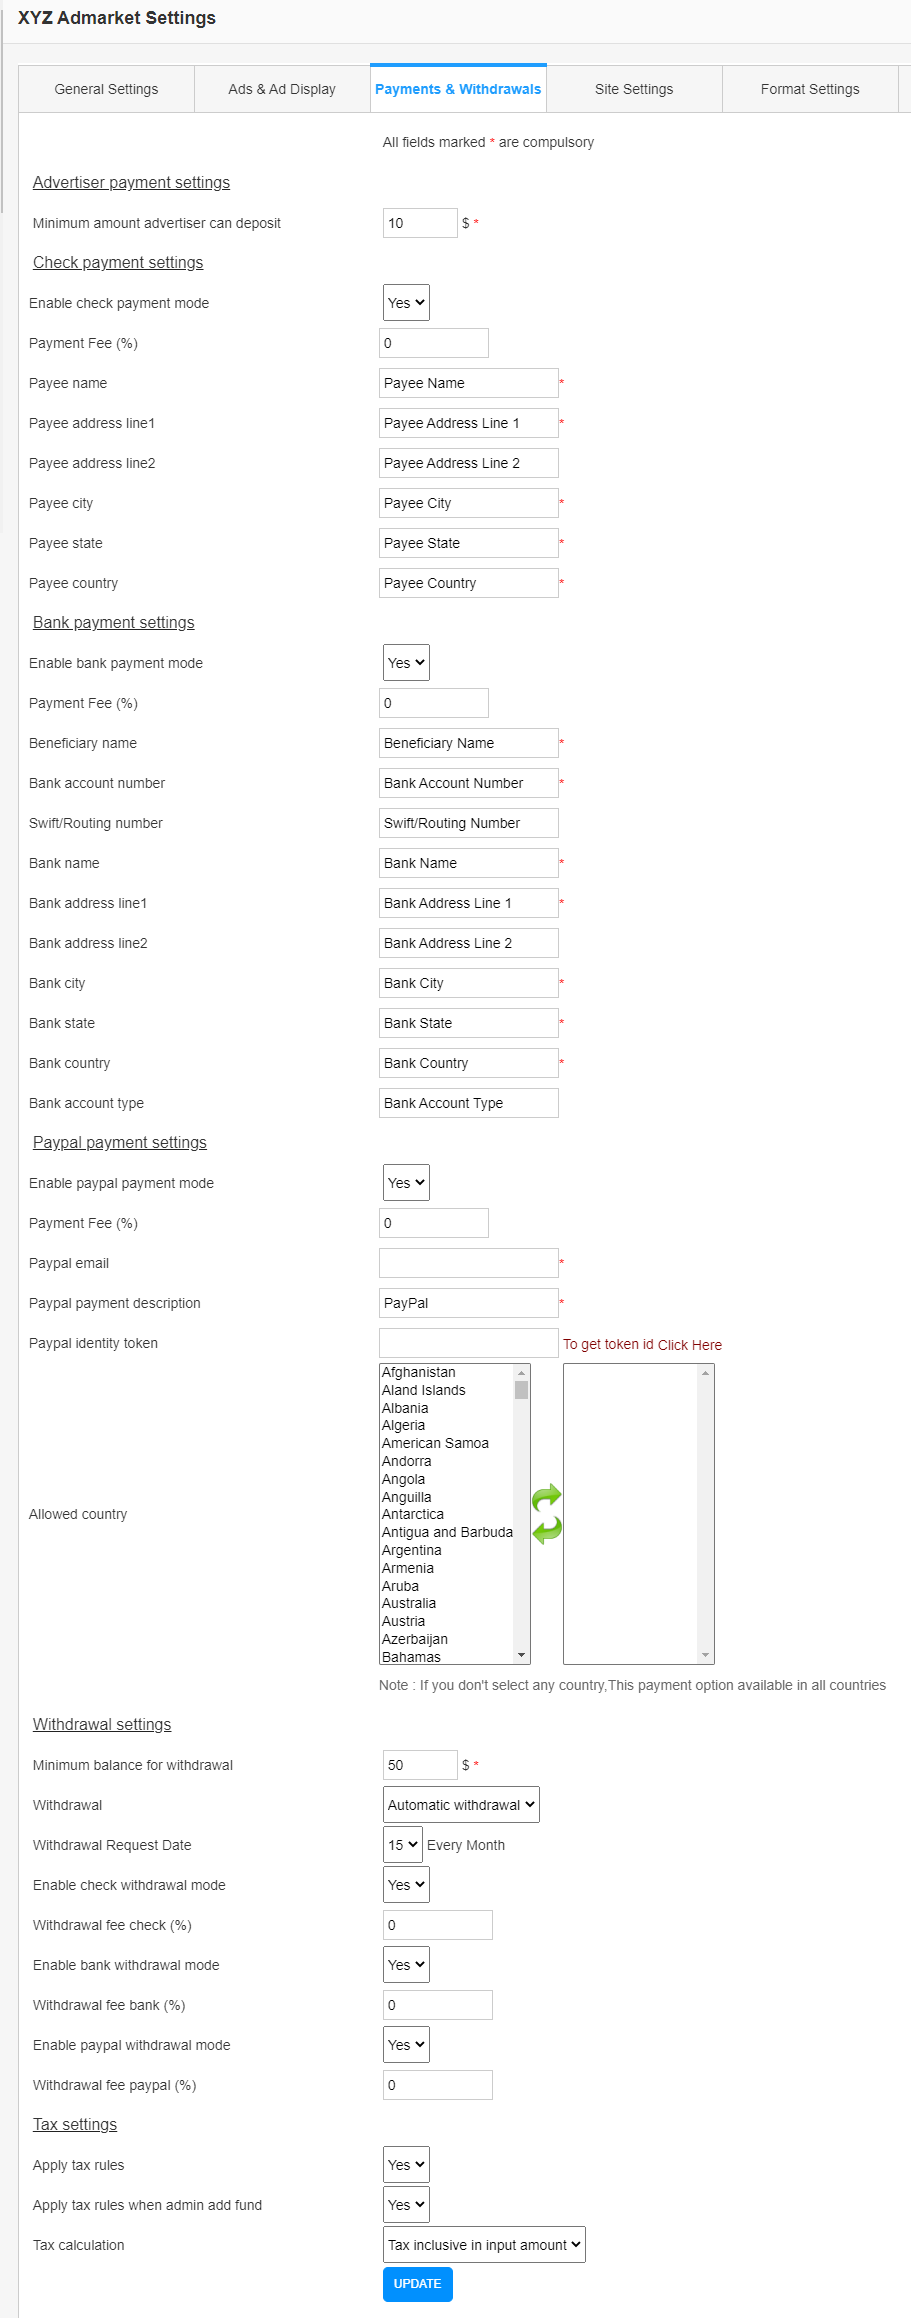 XYZ-Admarket-Payments and Withdrawals Settings